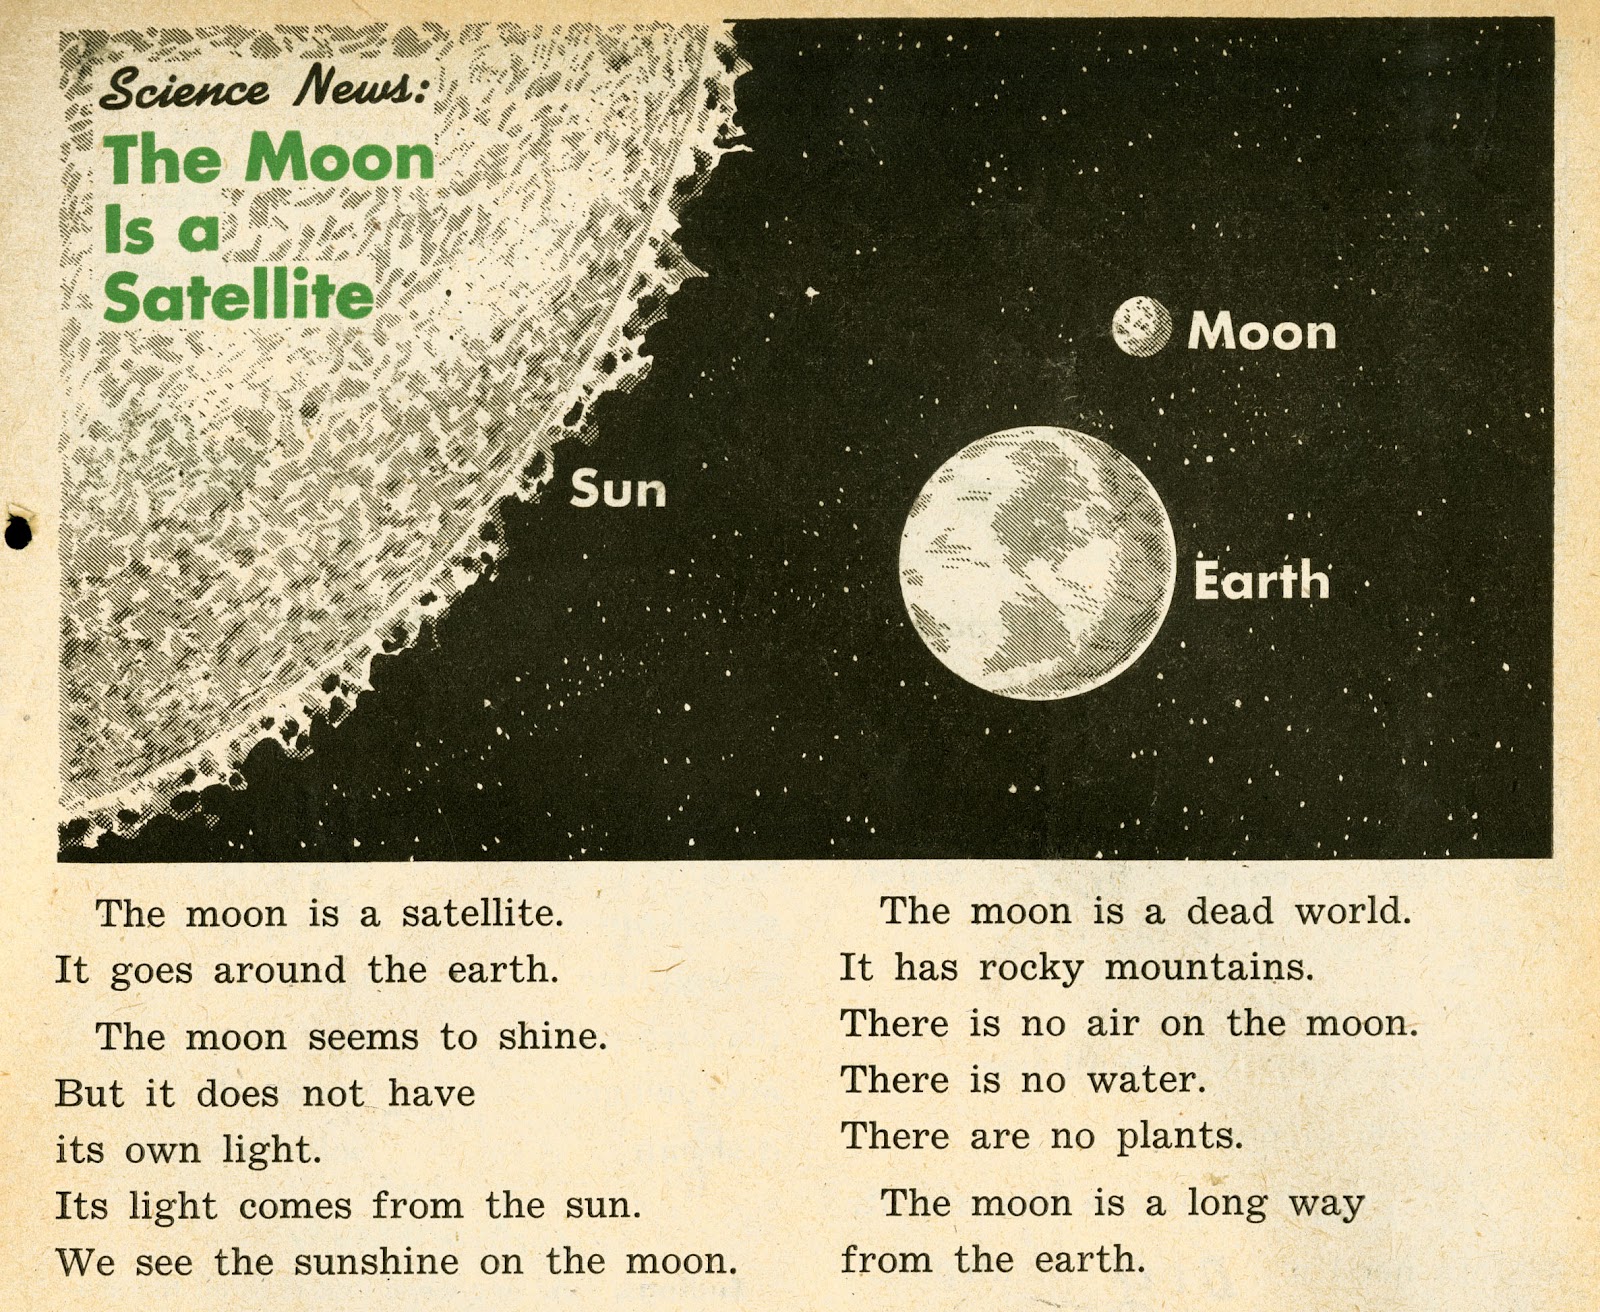 Moons satellite. Moon Satellite. The Moon - a Satellite of the Earth. The Moon as a Satellite of the Earth for children. The Radiance of the Night Sun, the Moon is Dark..